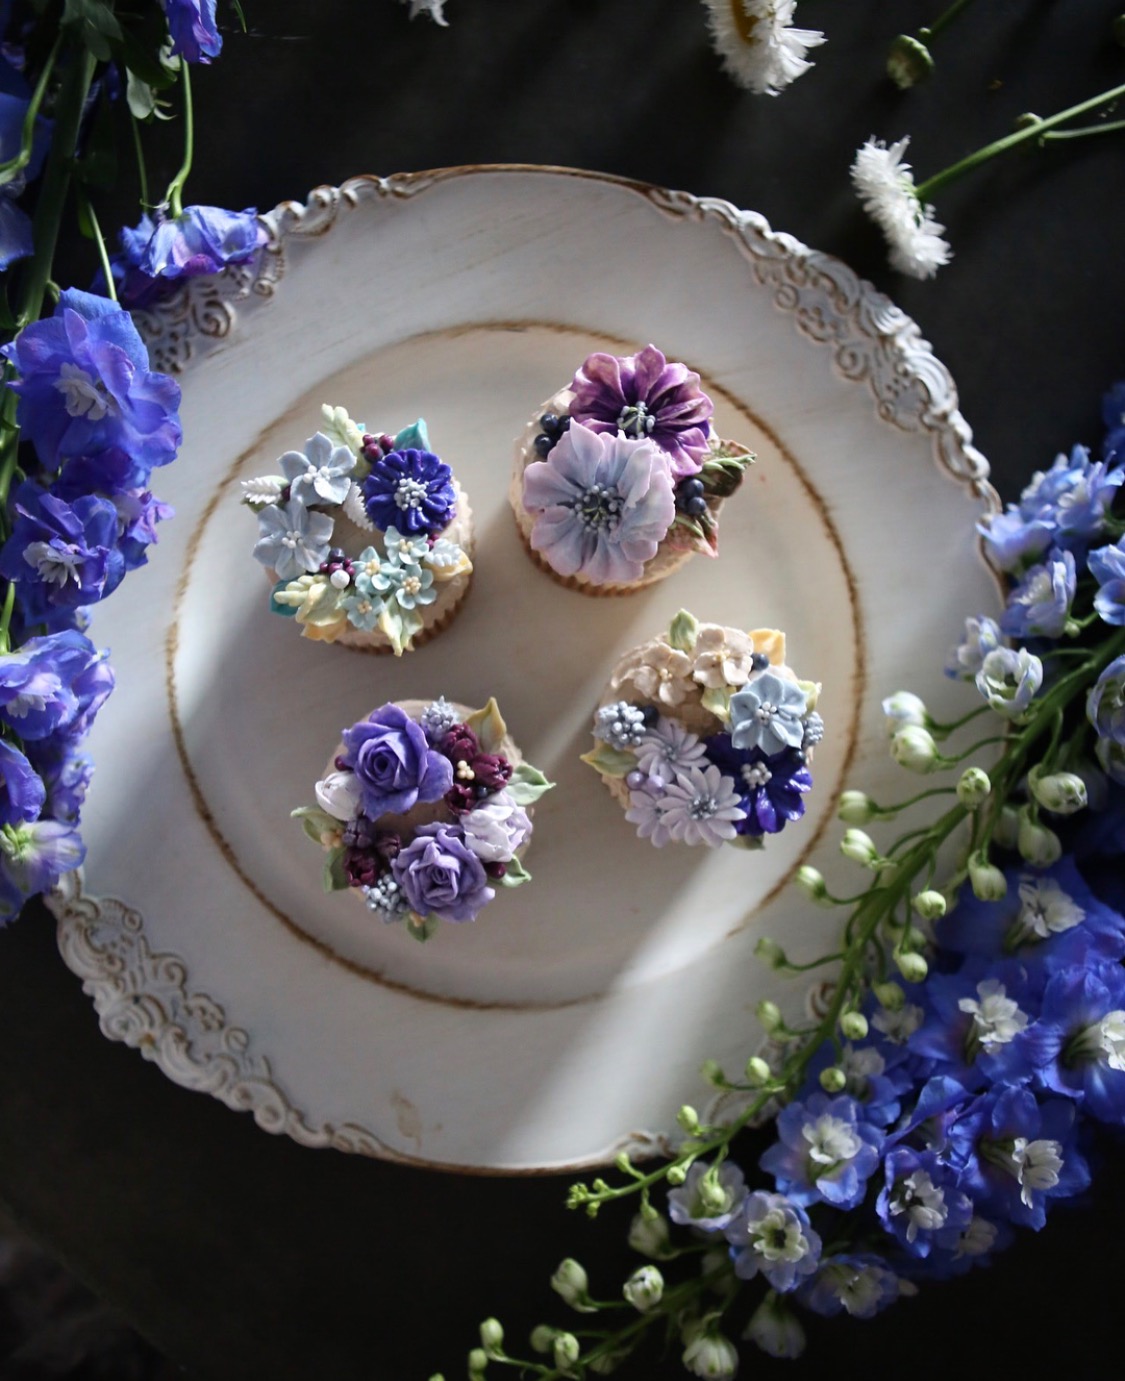 These flower cakes will blow your mind away